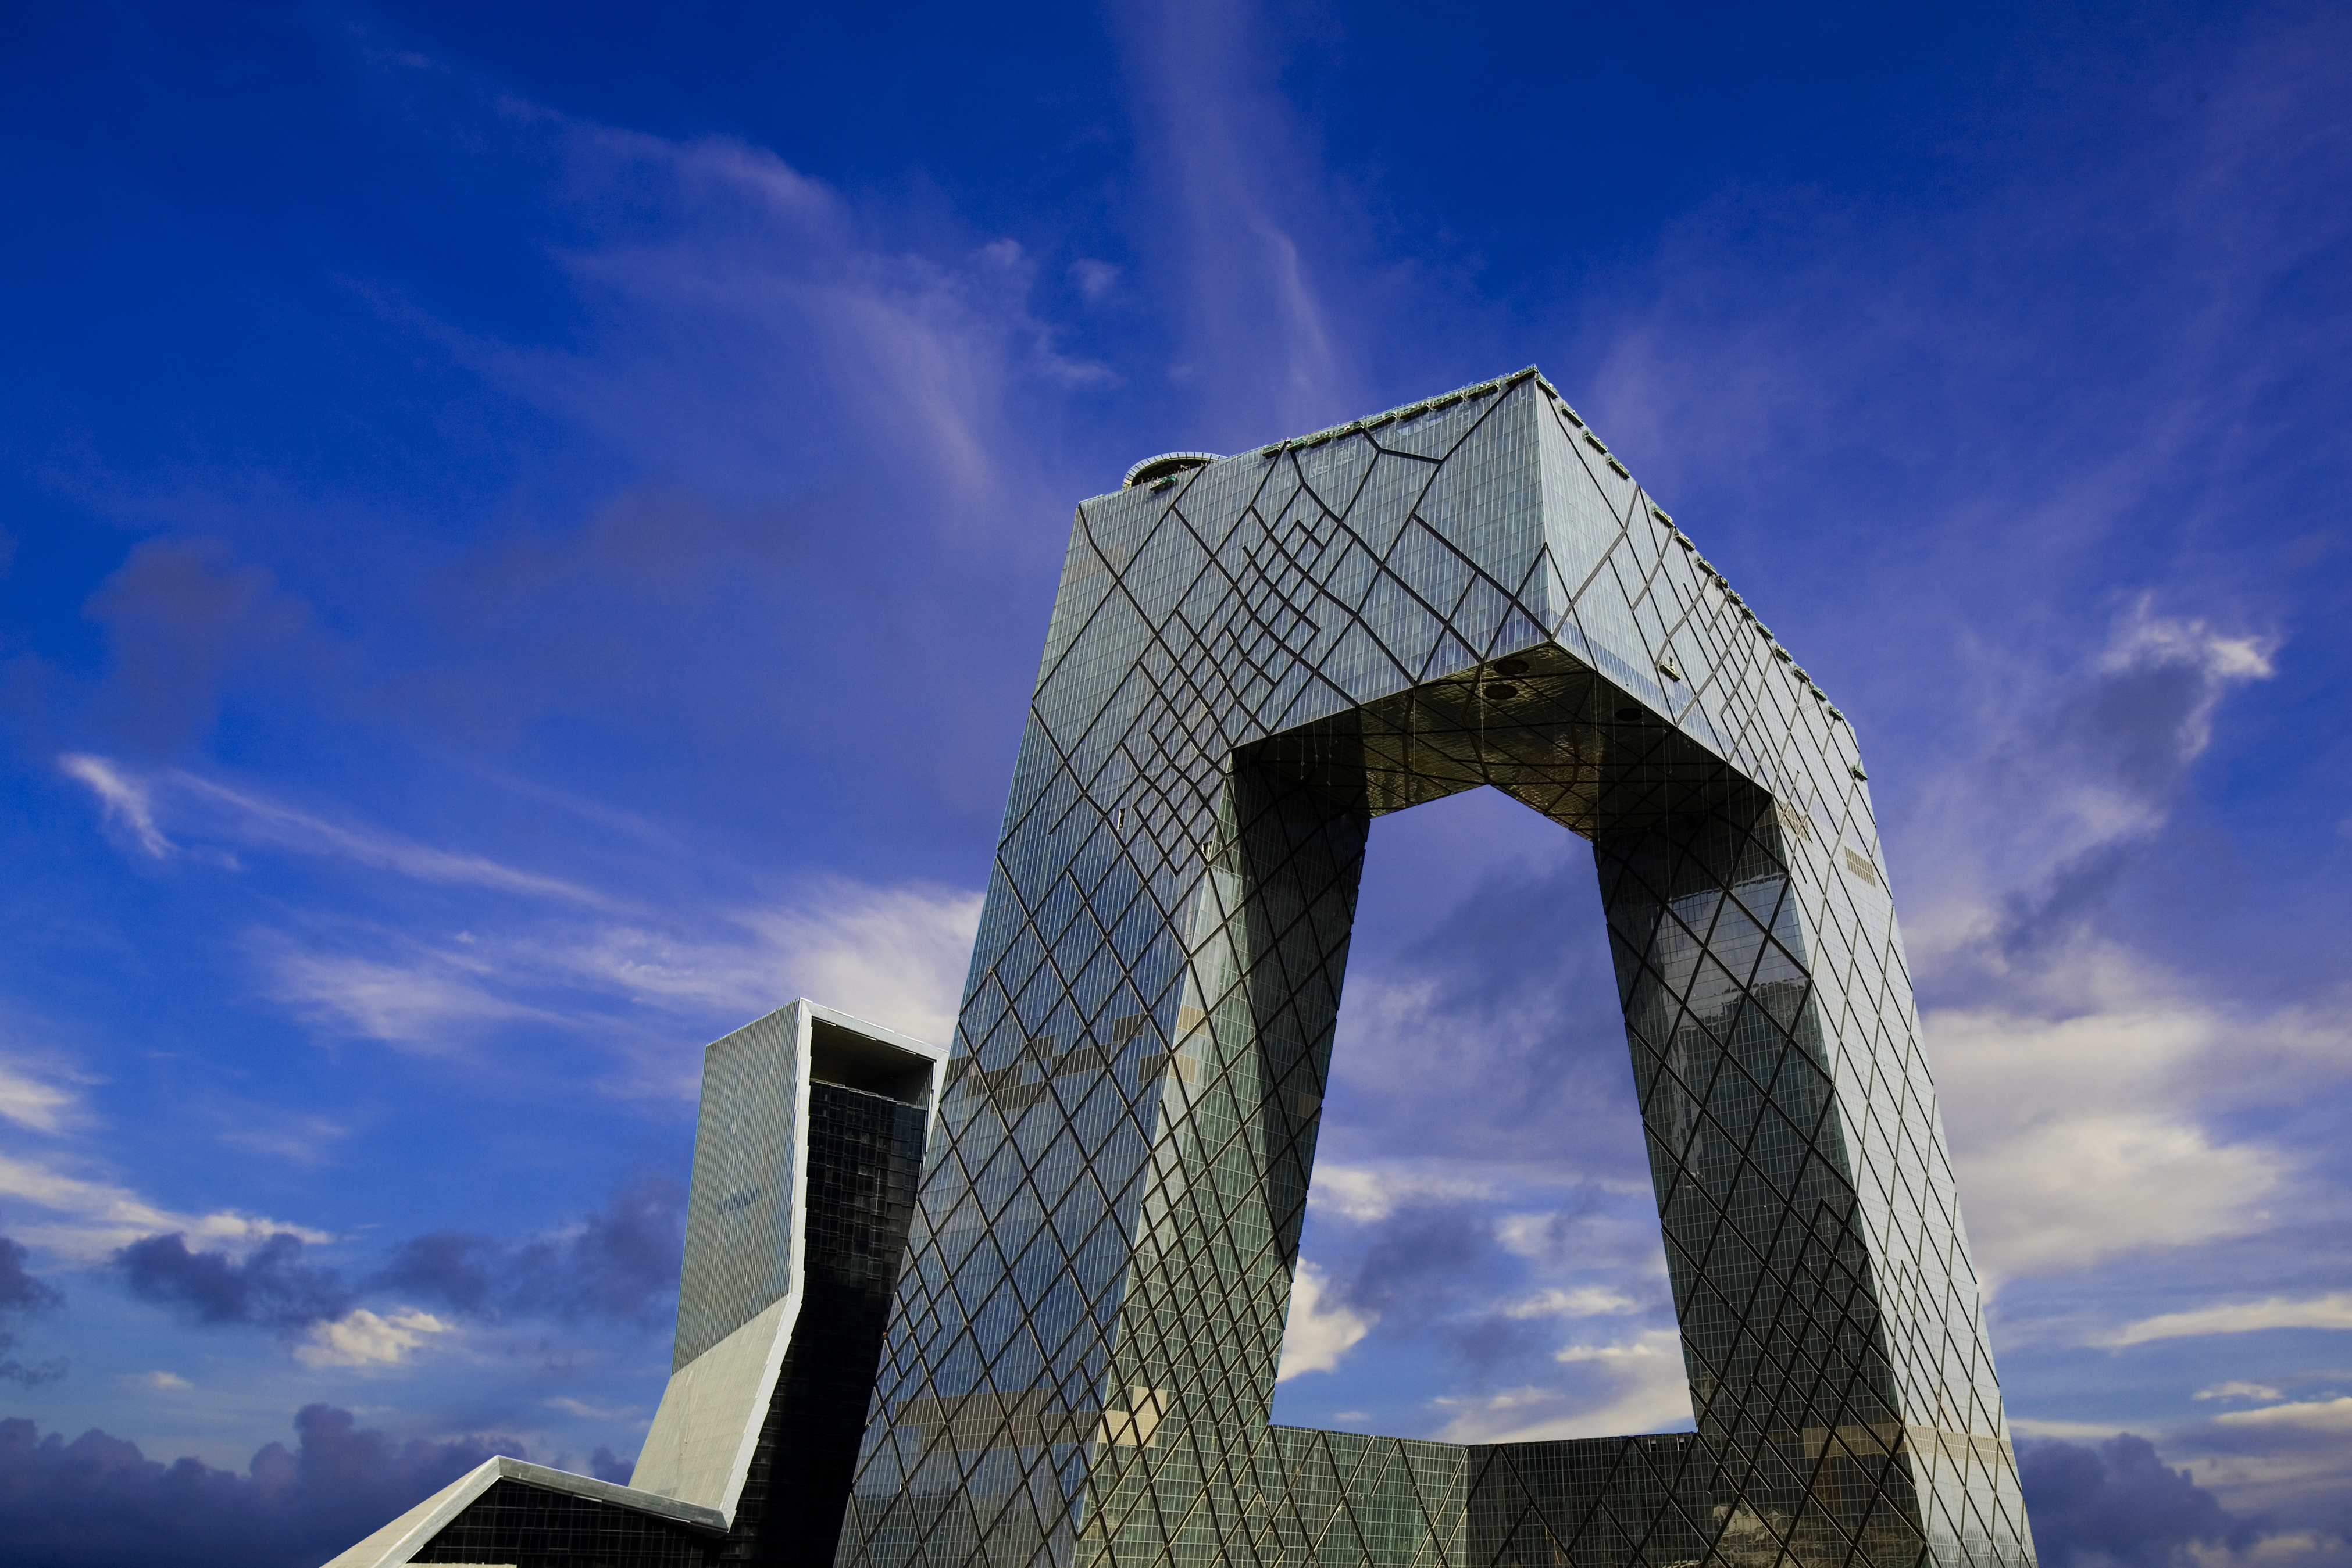 CCTV Headquarters | Beijing, China Attractions - Lonely Planet